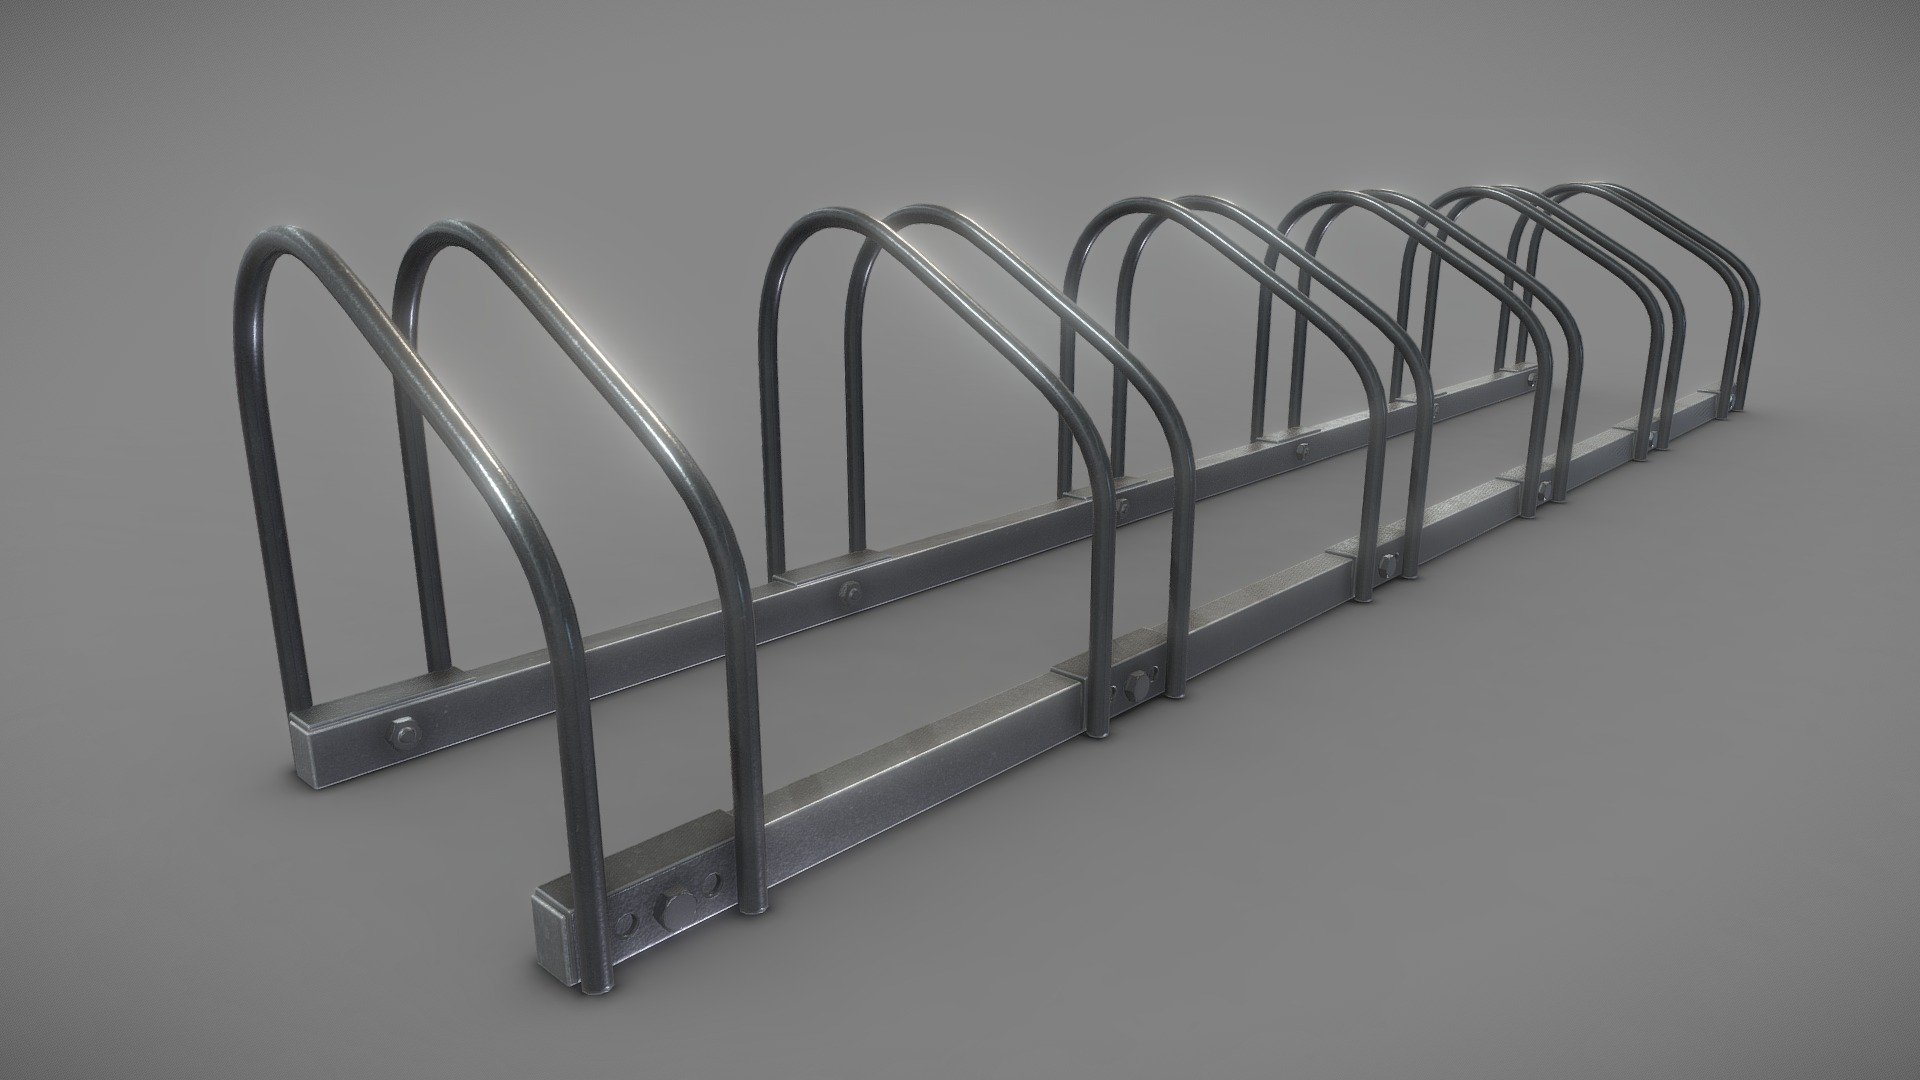 Here is the pbr-textured (4K) low-poly version of bicycle stand [4].




Bicycle Stand [4] (High-Poly Version) Total triangles 1M 






Steel Bracket Bike Stand [3] (High-Poly) Quads = 57792






Spiral Bike Stand [2] (High-Poly Version) Total Triangles 438.2k 

Bicycle Shelter with Glass Roof (High-Poly) (Bicycle Stand [1])

Bike Shelter With Glass Roof (Textured Mid-Poly) 



3d-modeled by 3DHaupt in Blender-2.83.3 - Bicycle Stand [4] (Low-Poly Version) - Buy Royalty Free 3D model by VIS-All-3D (@VIS-All) 3d model